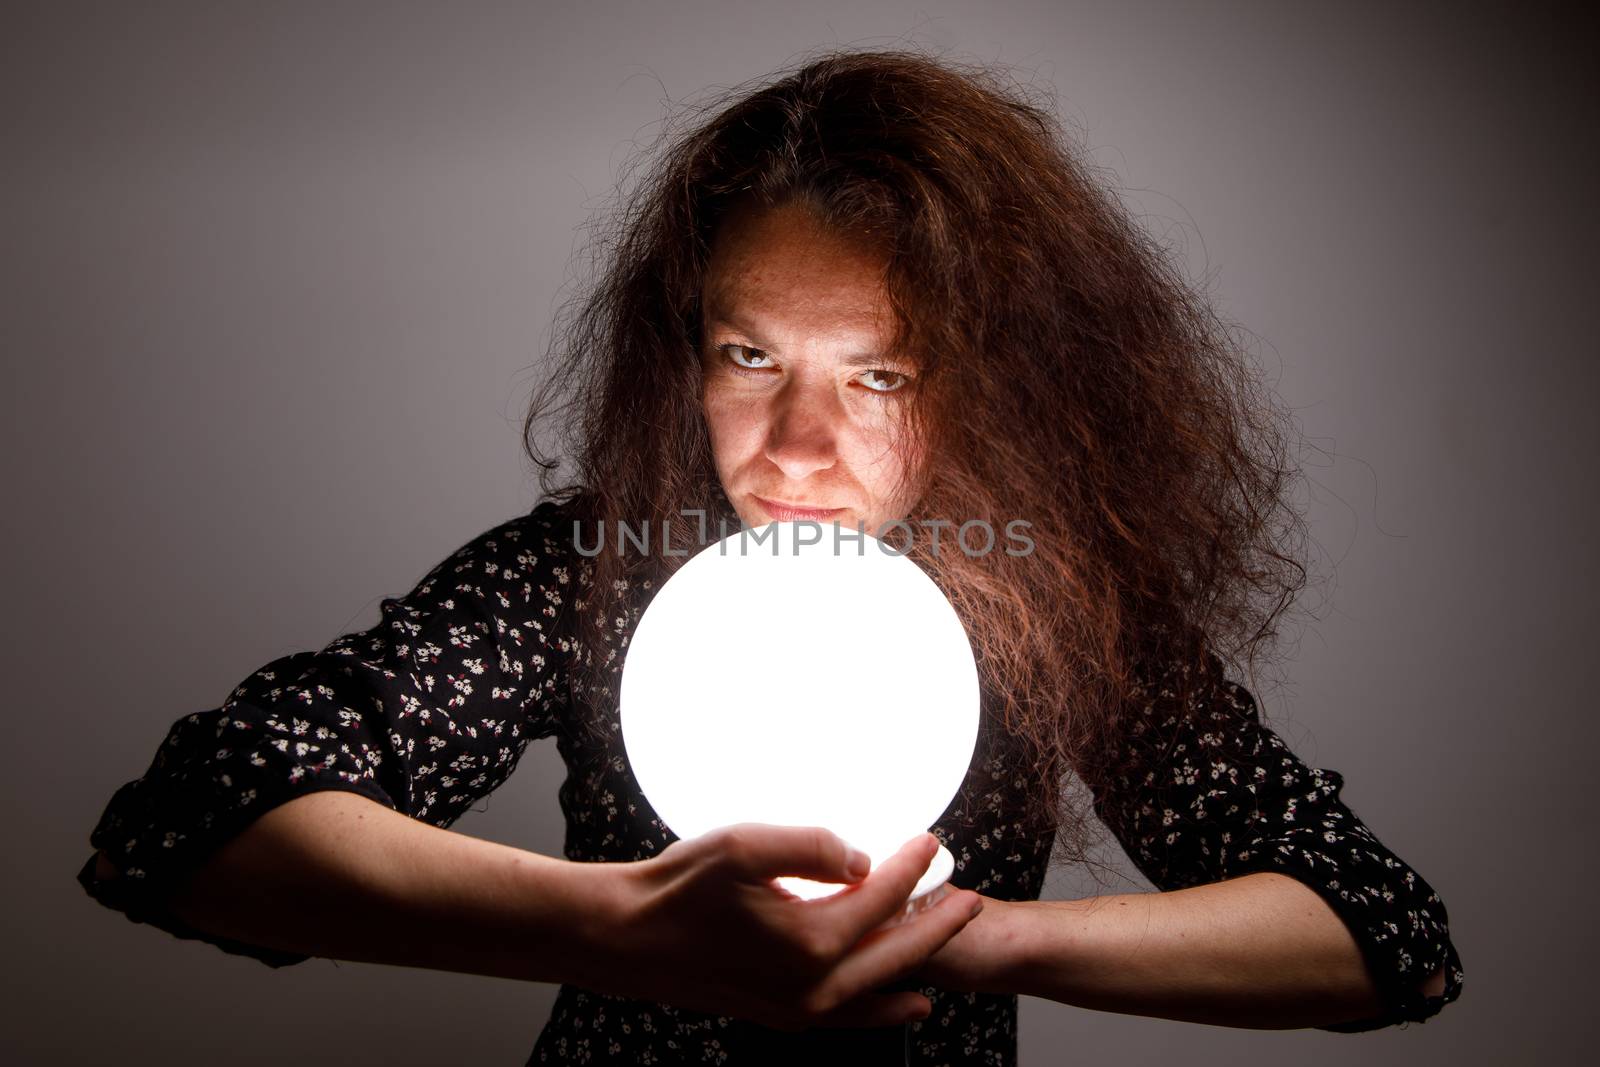 Fortuneteller holding a glowing ball in her hands.